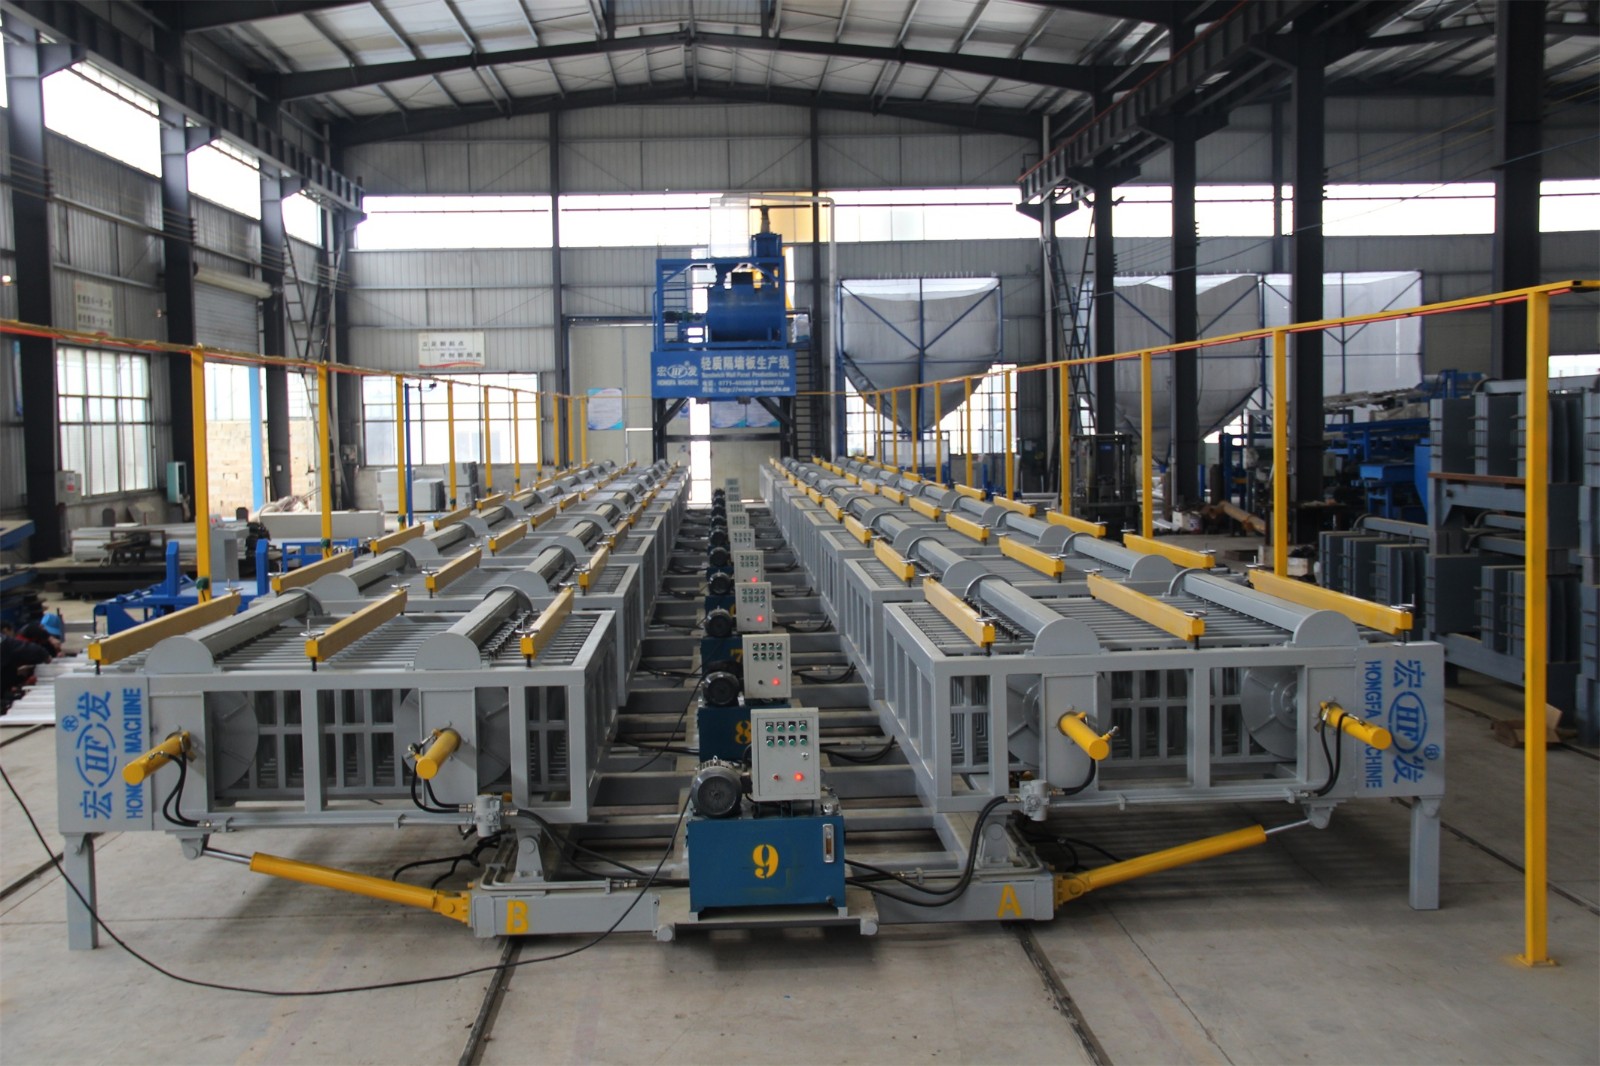 eps cement sandwich wall panel production line